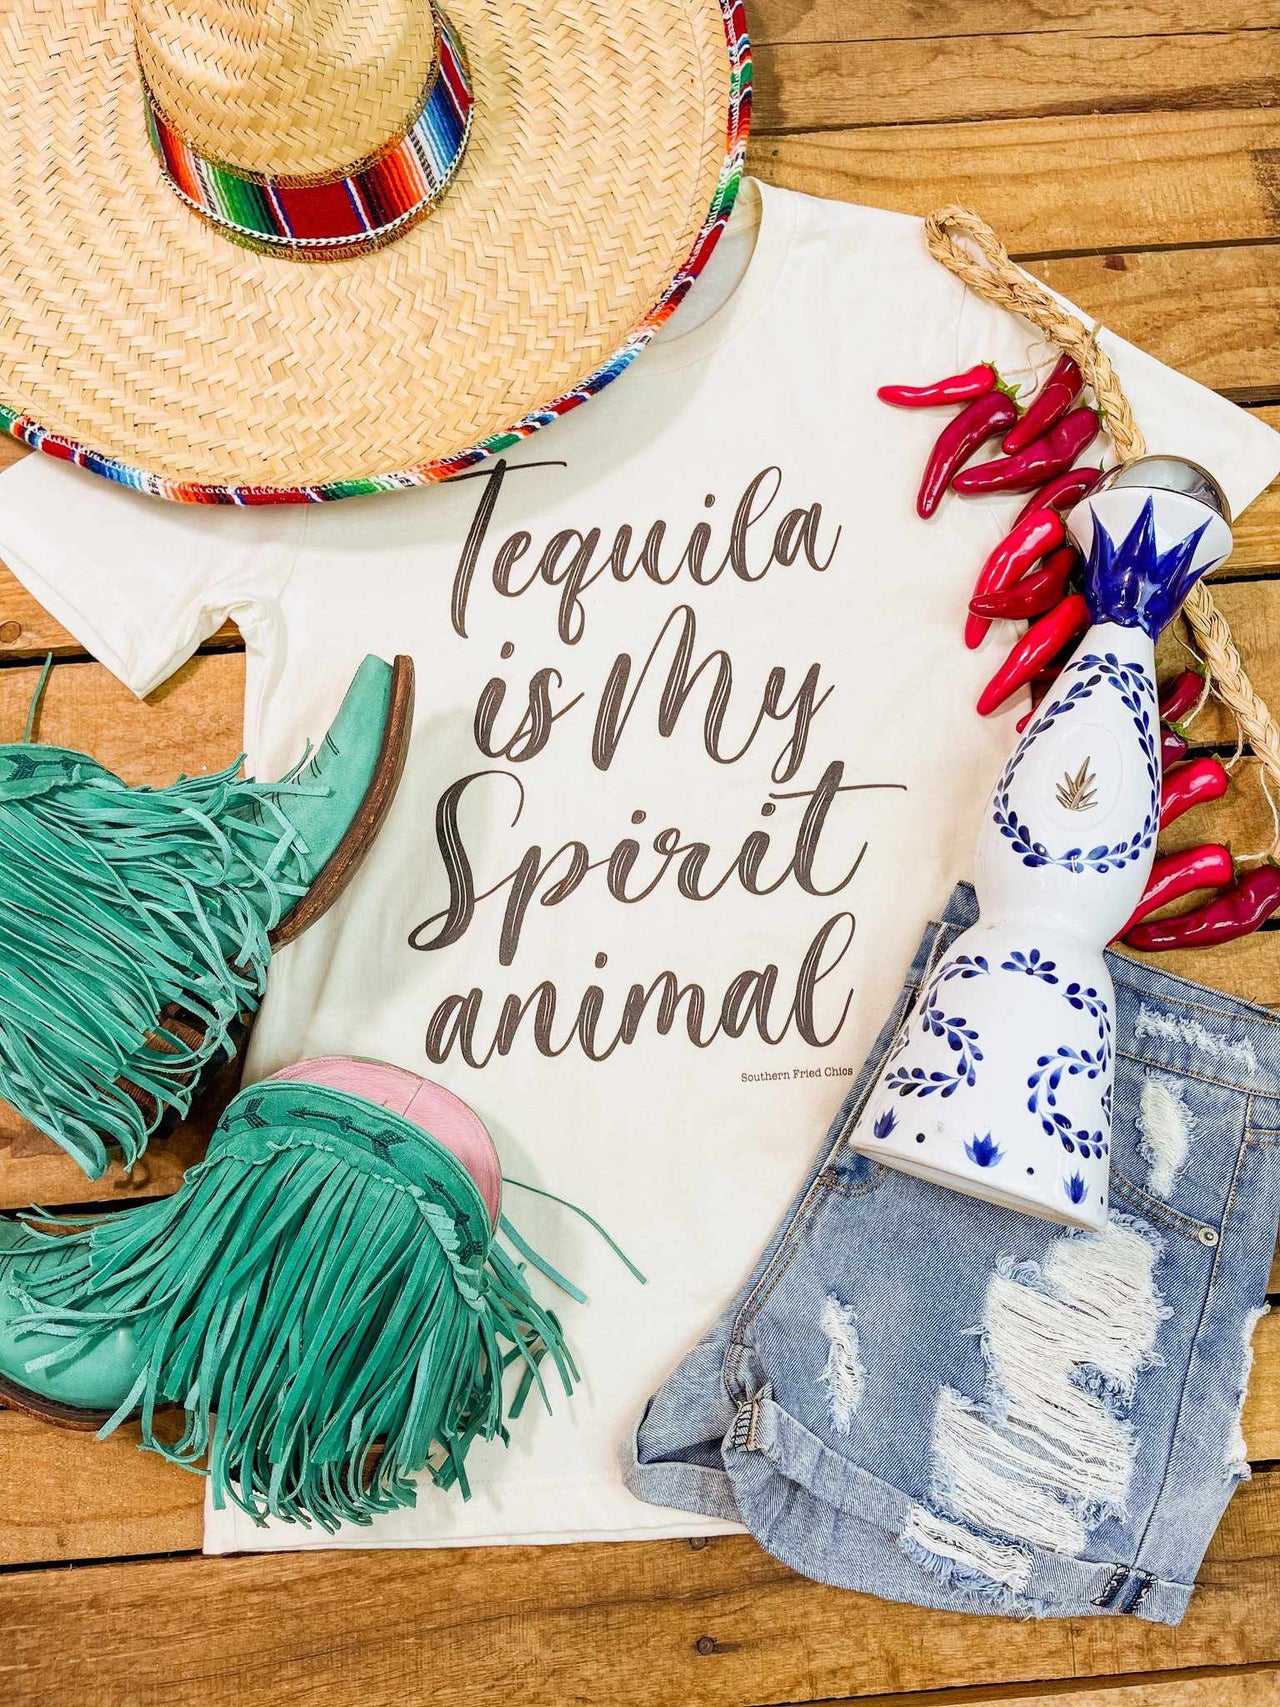 Tequila Is My Spirit Animal Tee-Southern Fried Chics